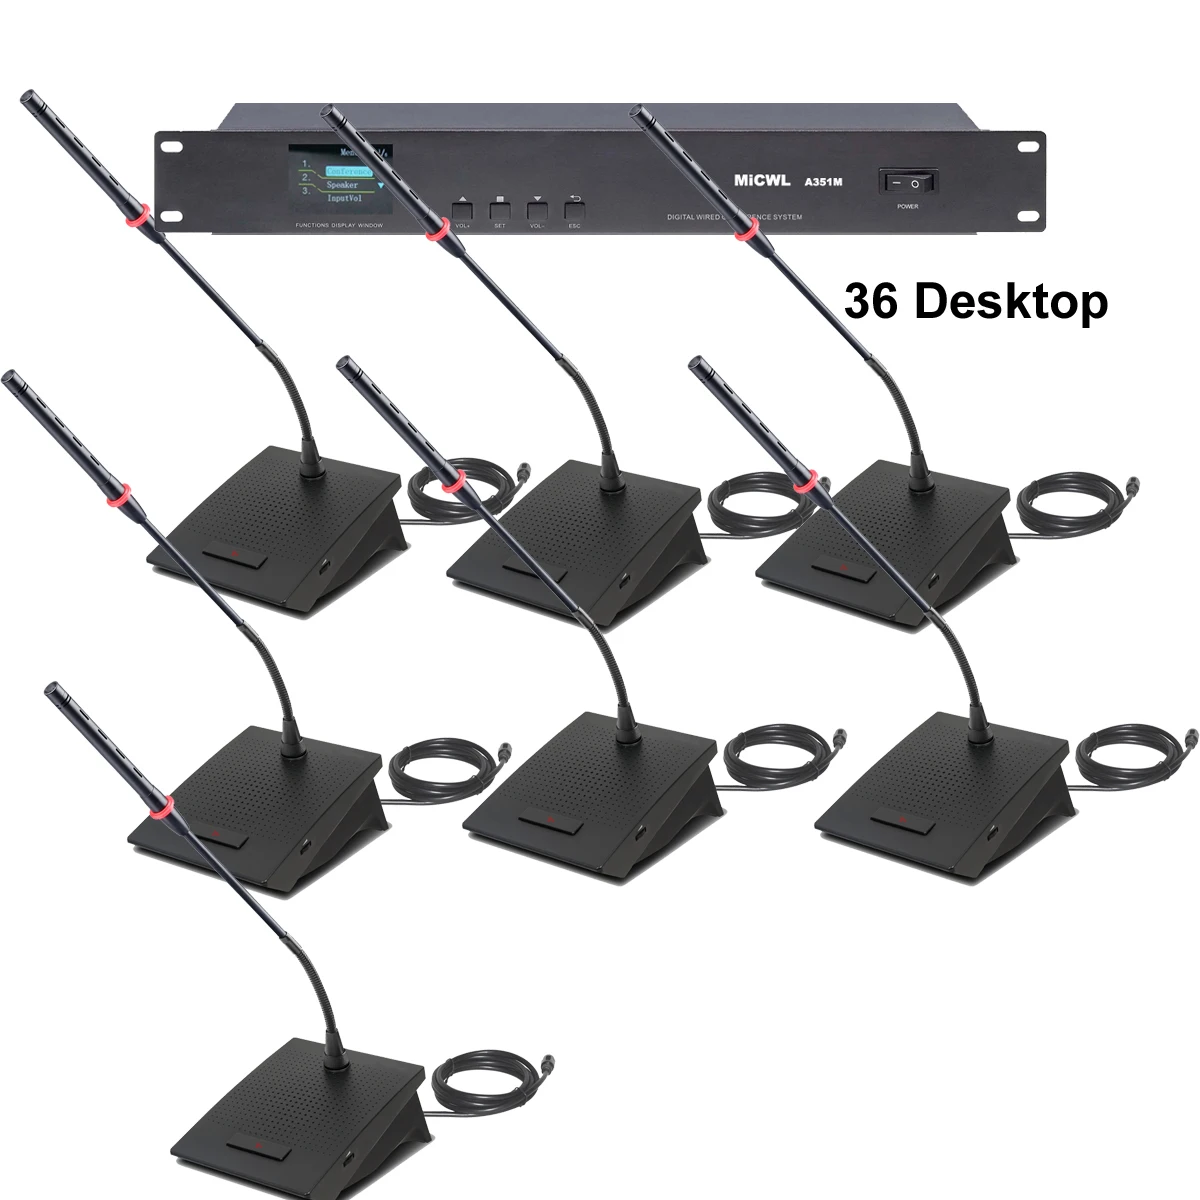 

36 Unit Goodeneck Digital Conference Microphone System 36 Table Discussion Speech Public Bbroadcast 1 President 35 Desktop Wired